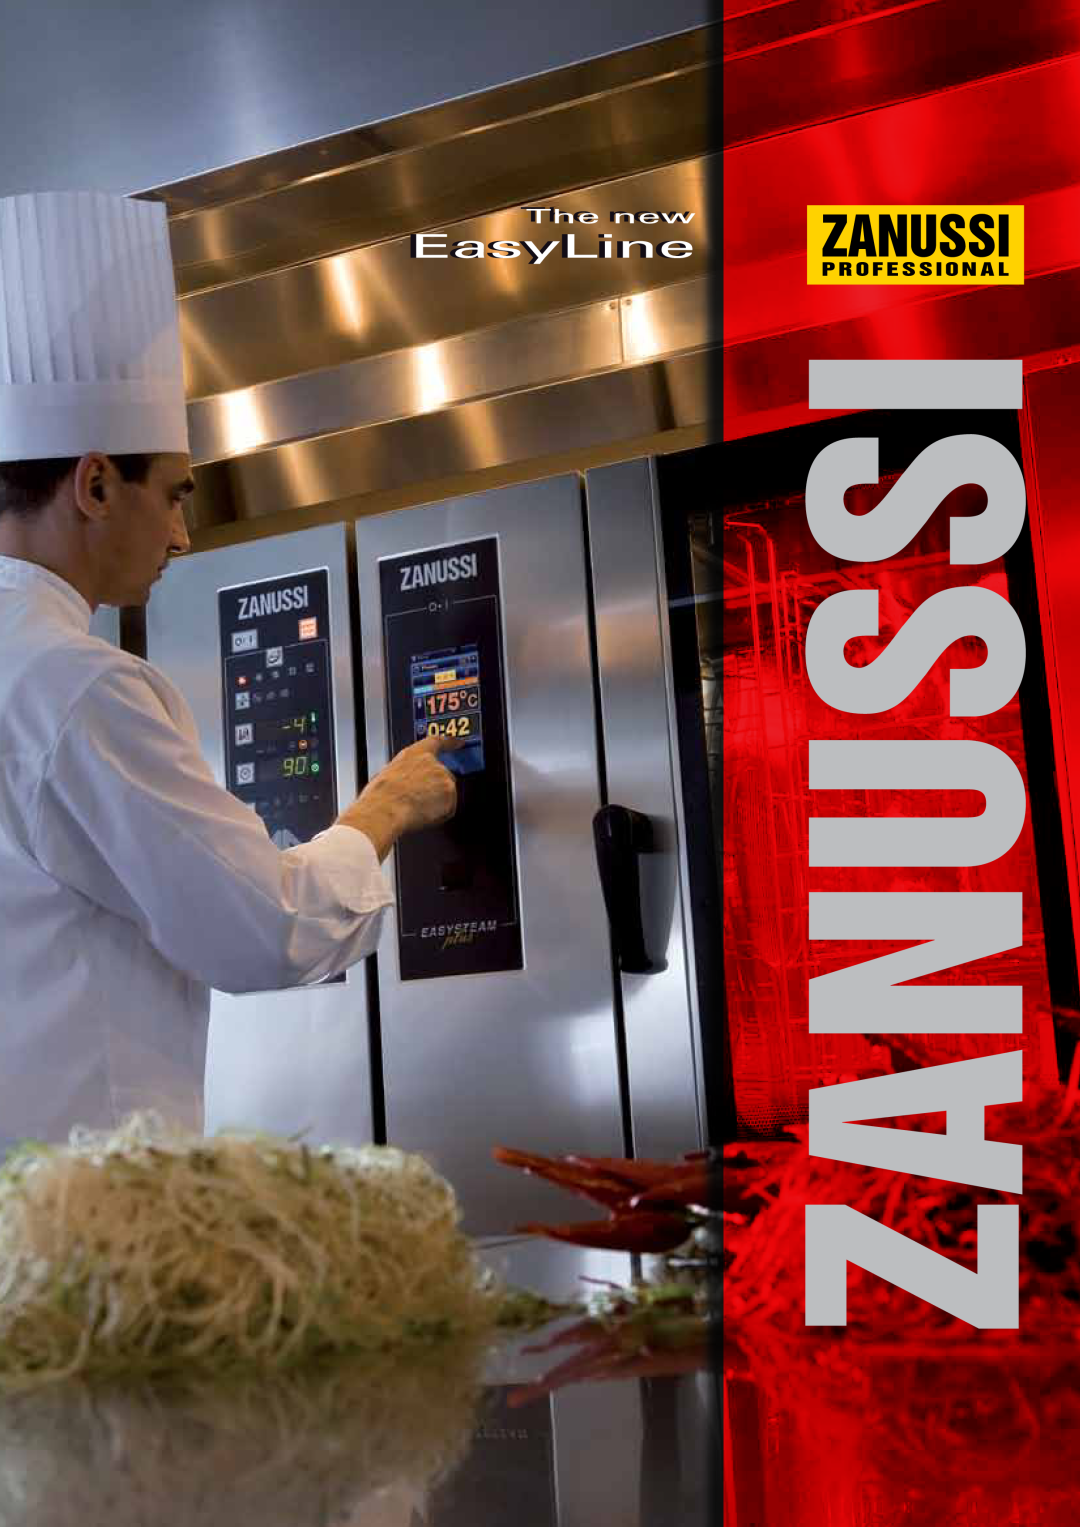 Zanussi Convection Oven manual EasyLine, The new 